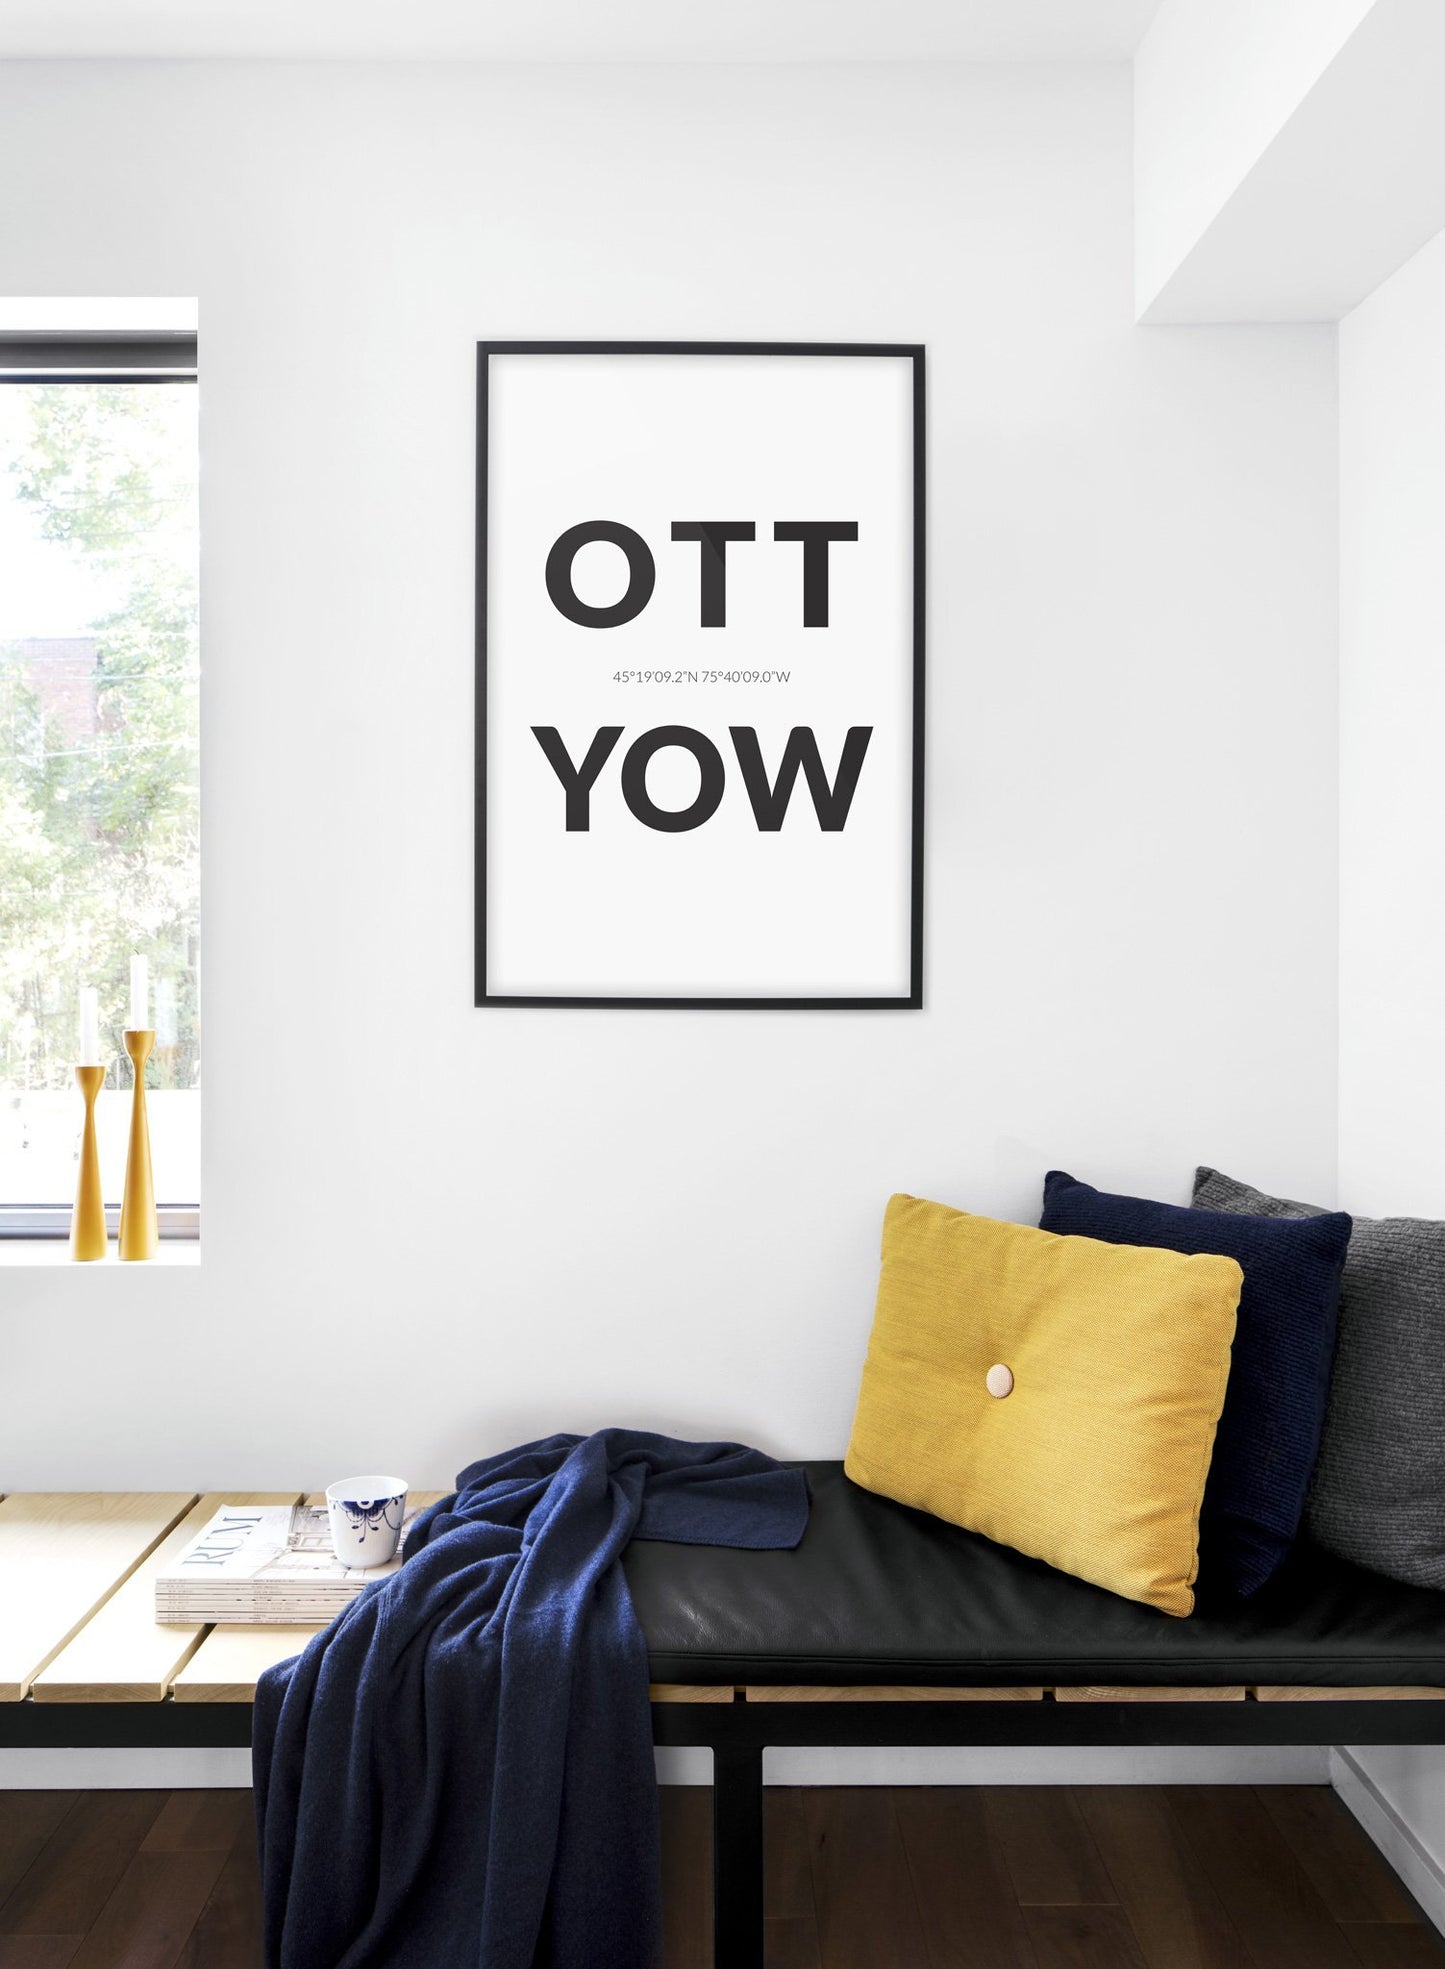 Destination: Ottawa modern minimalist photography poster by Opposite Wall - Bedroom